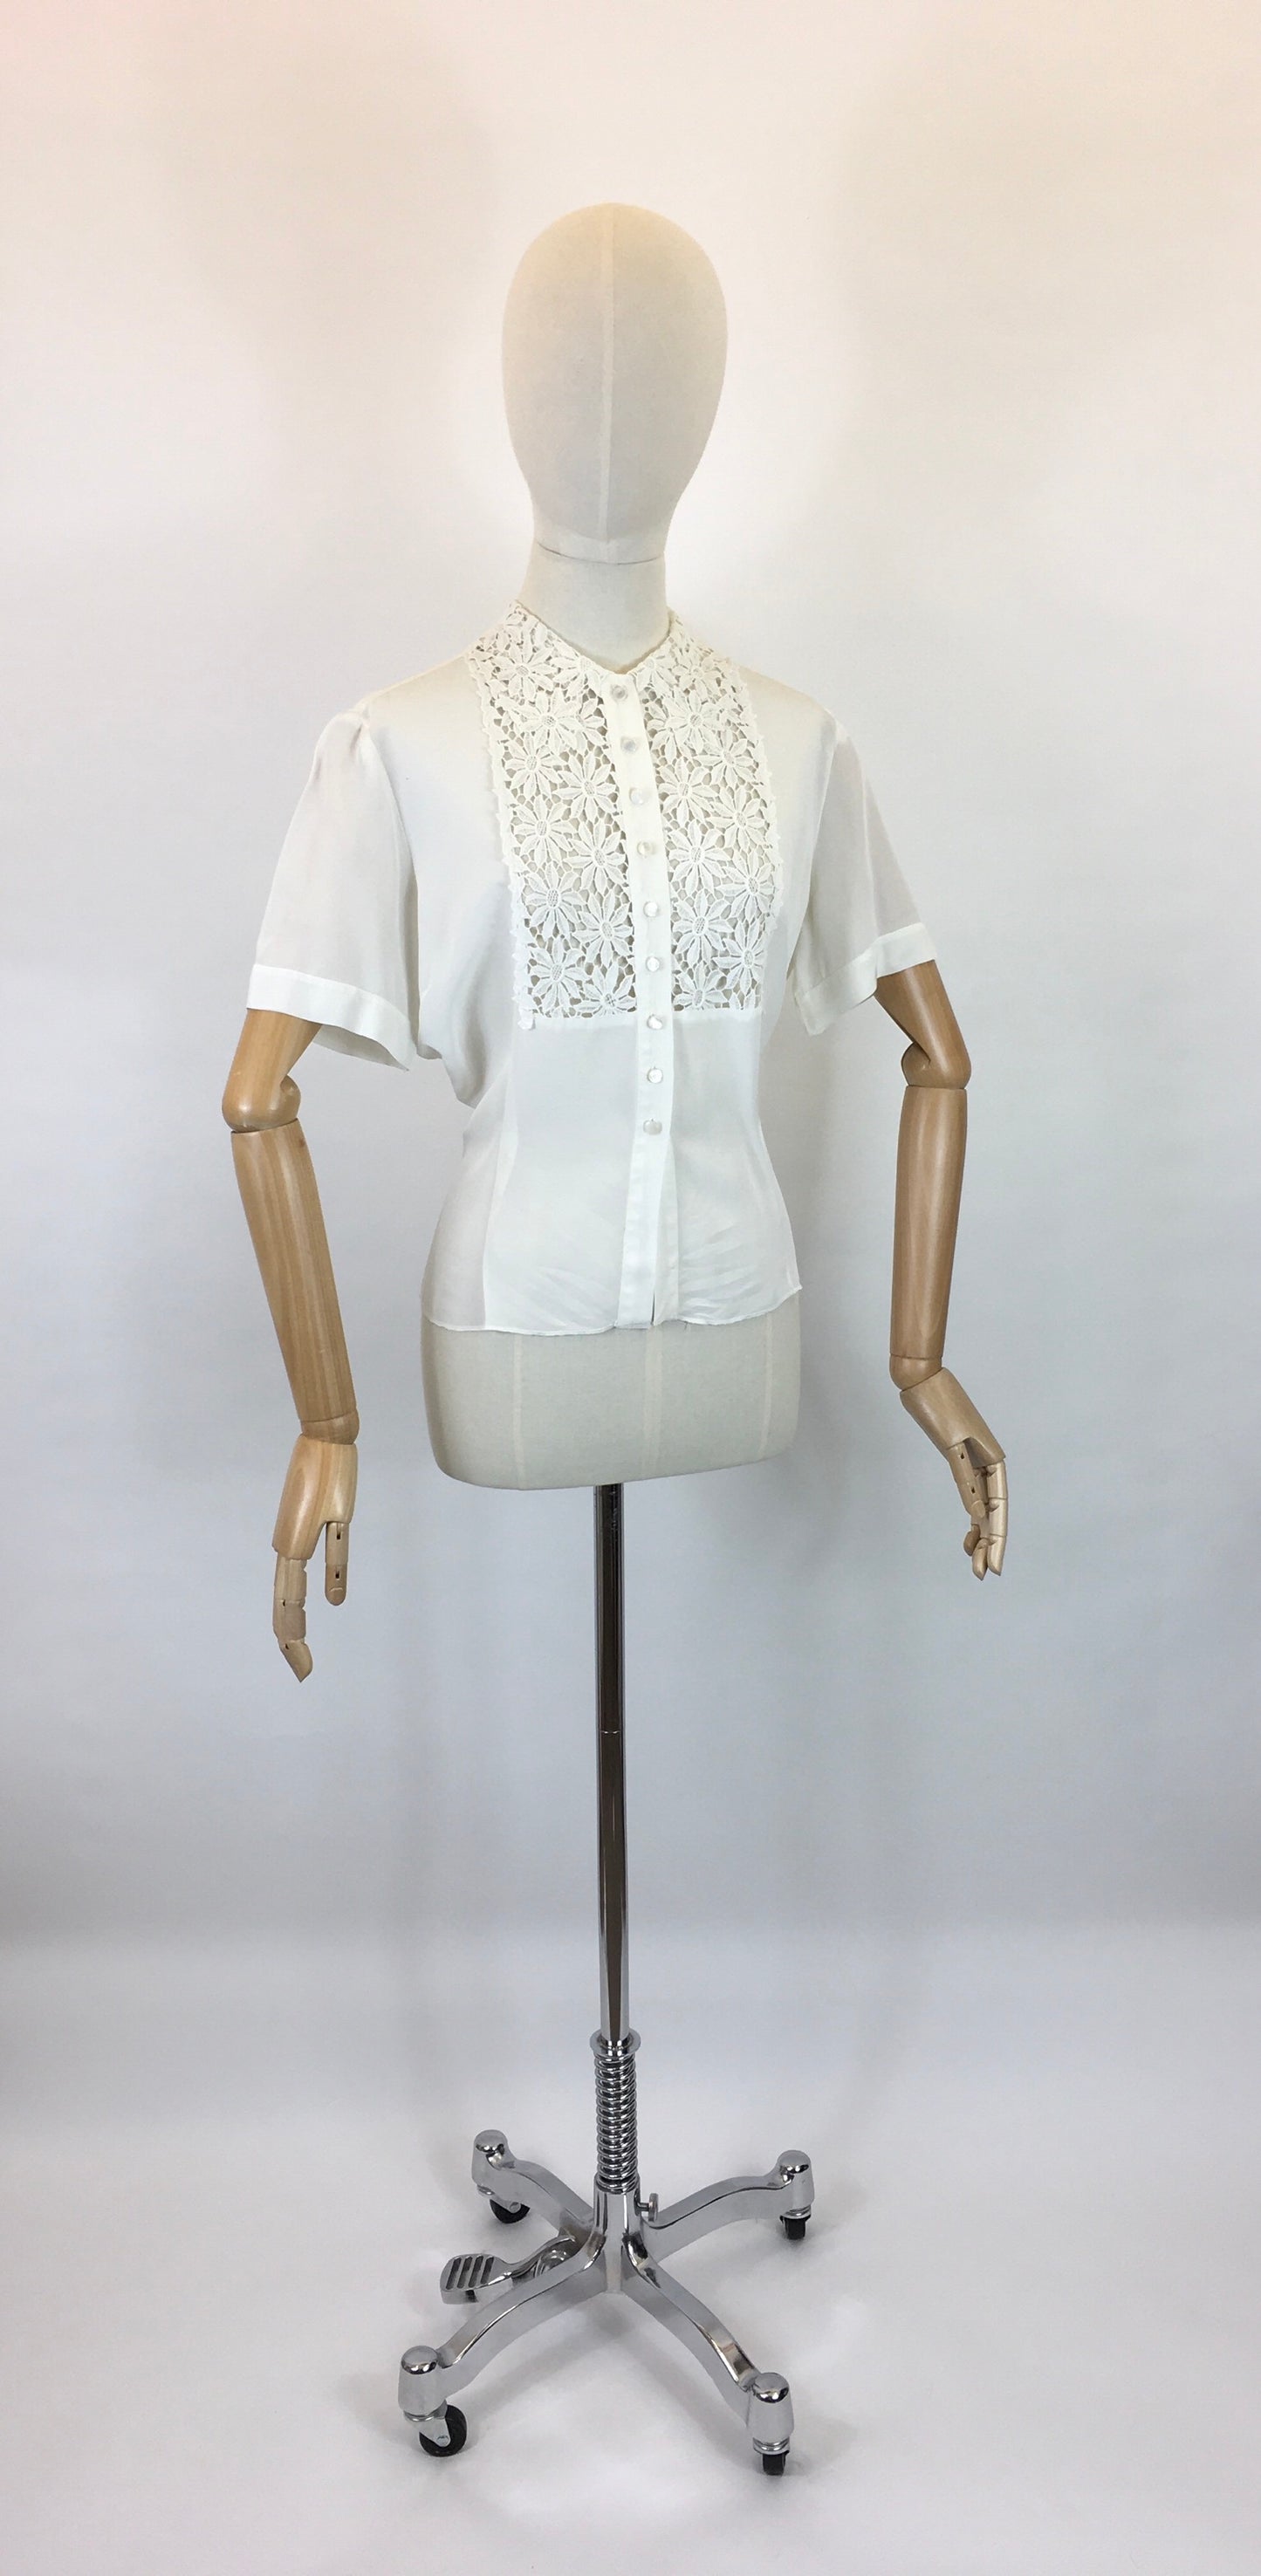 Original 1940’s ‘ Judy Bond’ White Blouse - With Stunning Floral Lace Detailing To The Bodice Panel